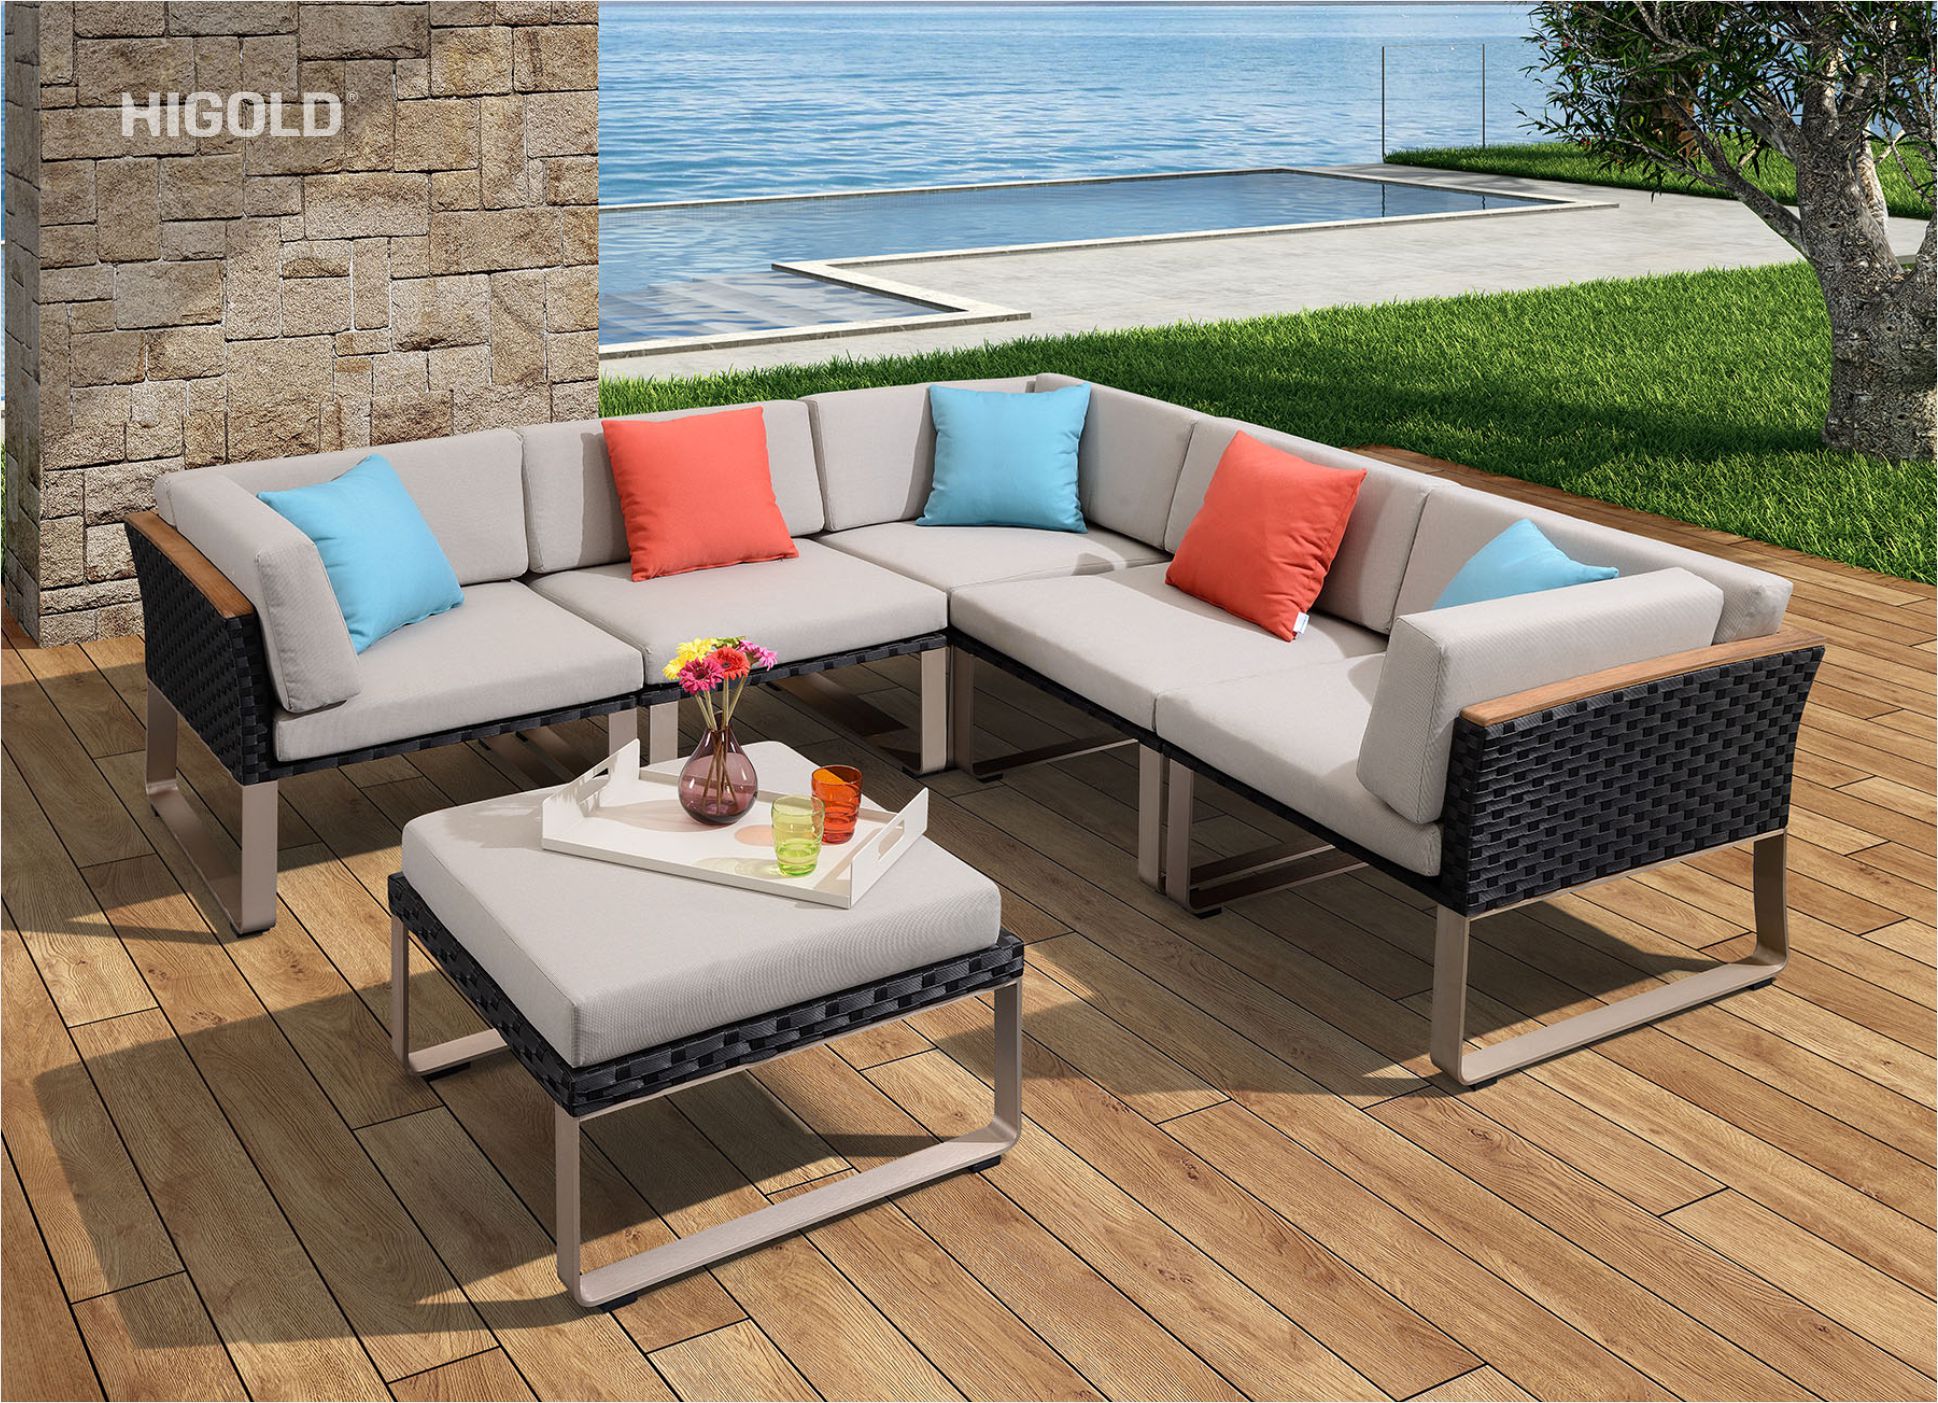 Bowie outdoor dining set for 6